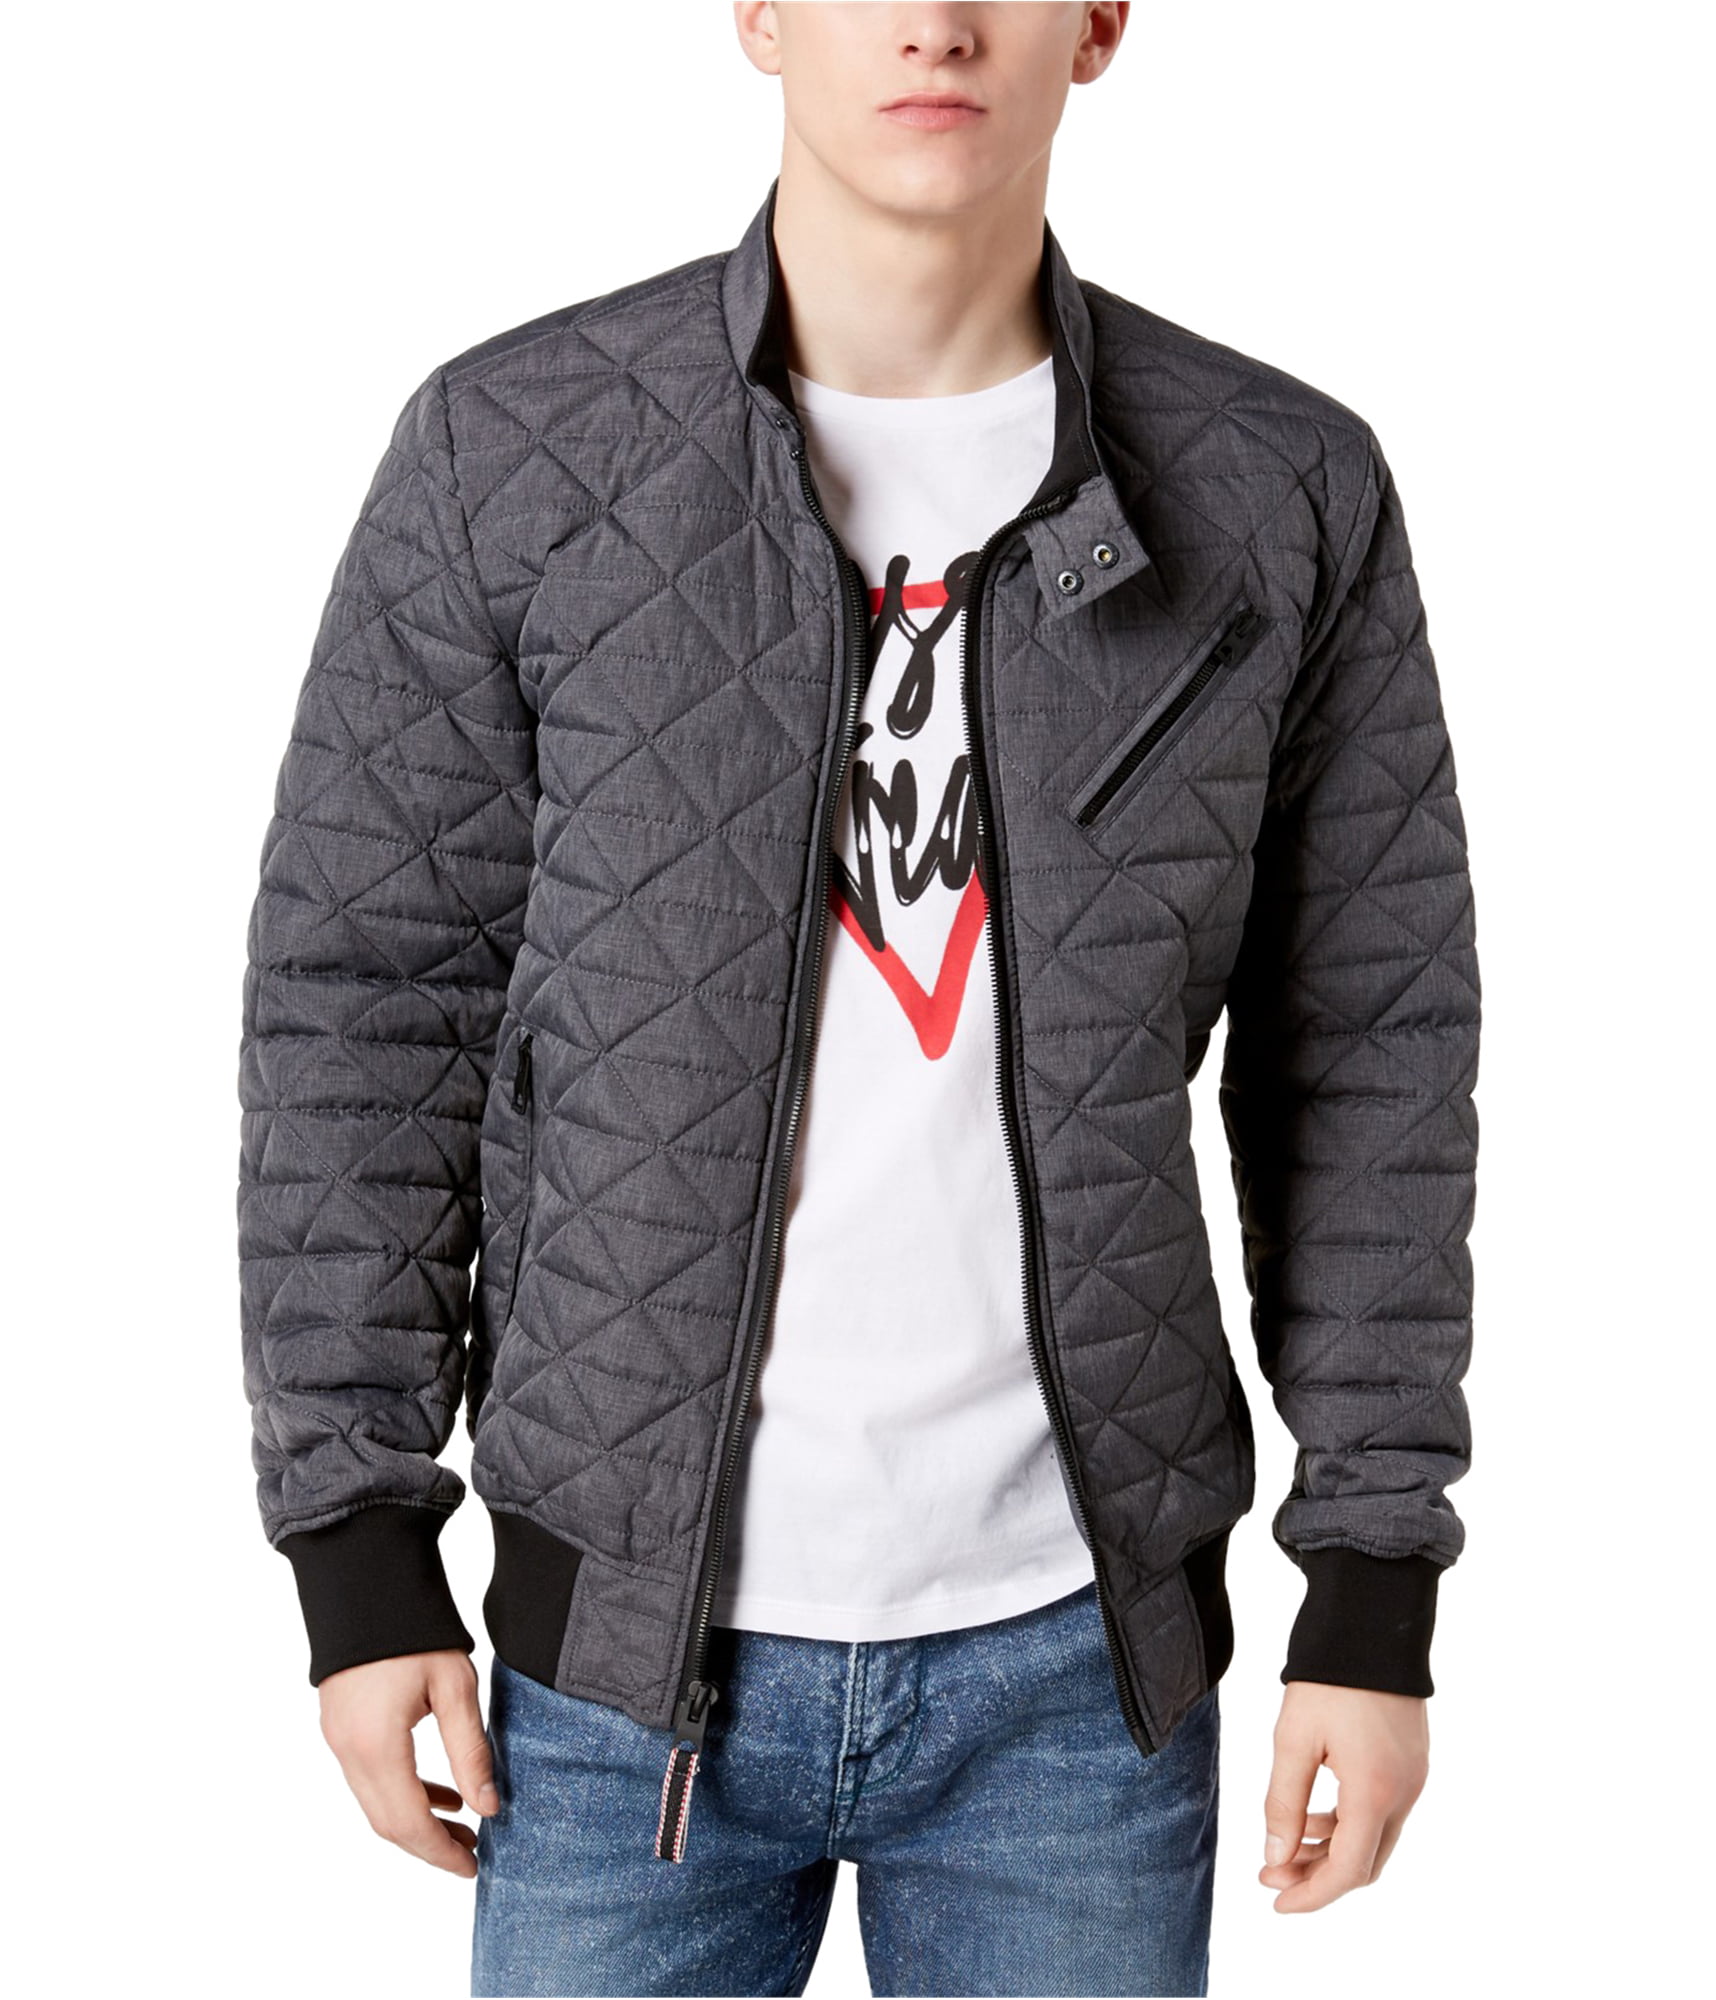 GUESS Mens Quilted Bomber Jacket, Grey, Large - Walmart.com